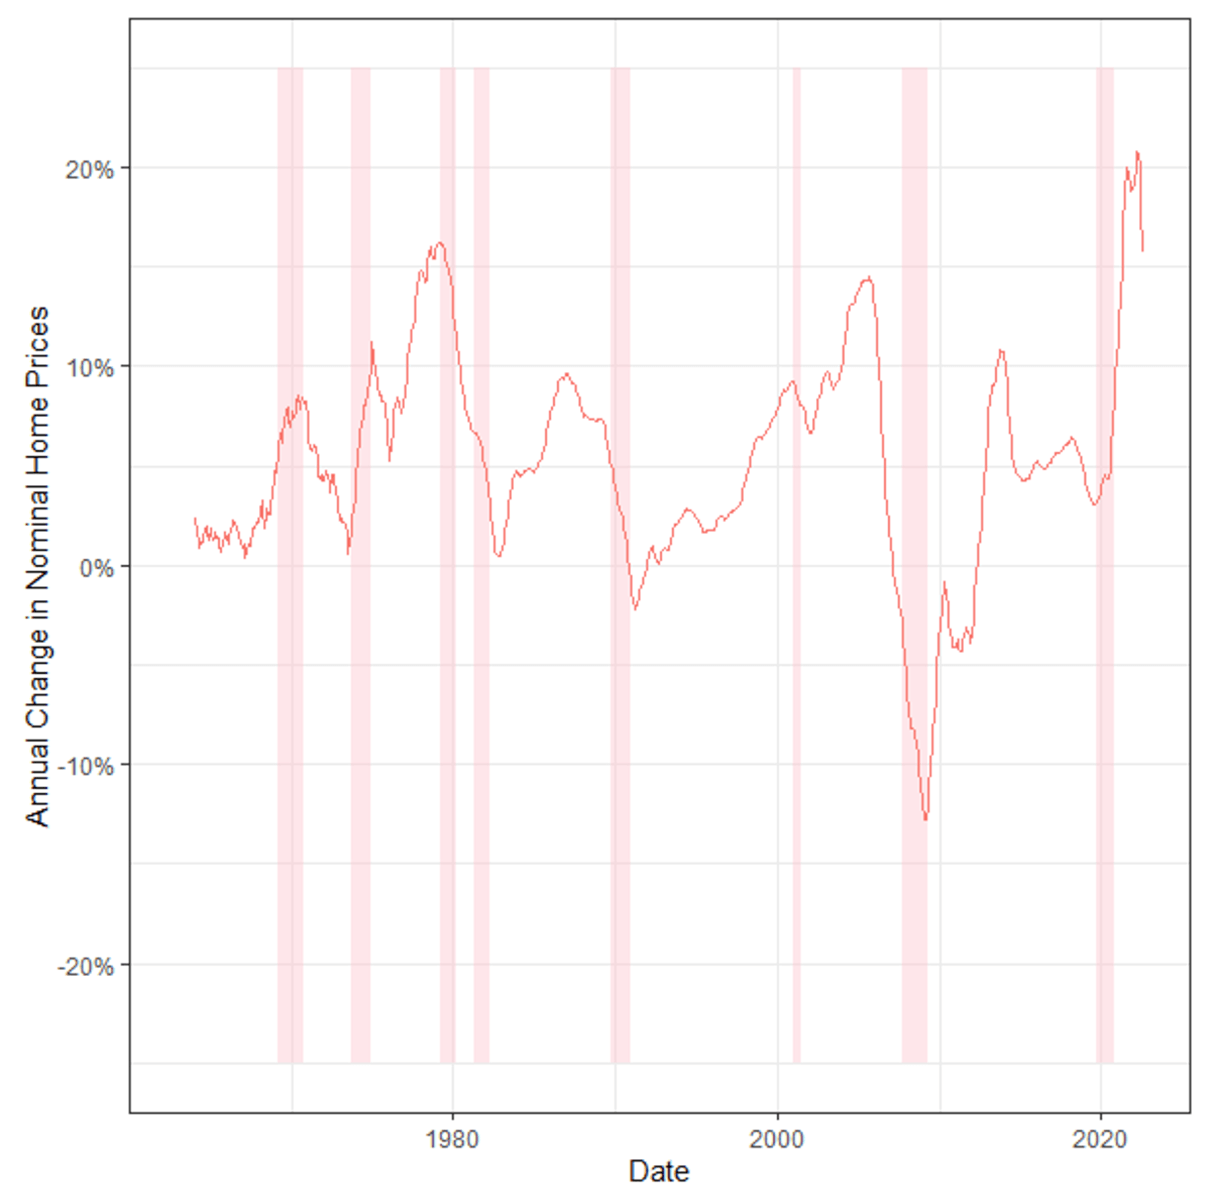 Figure 2: Year Over Year Changes in S&P CoreLogic Case-Shiller Index, 1964-Present